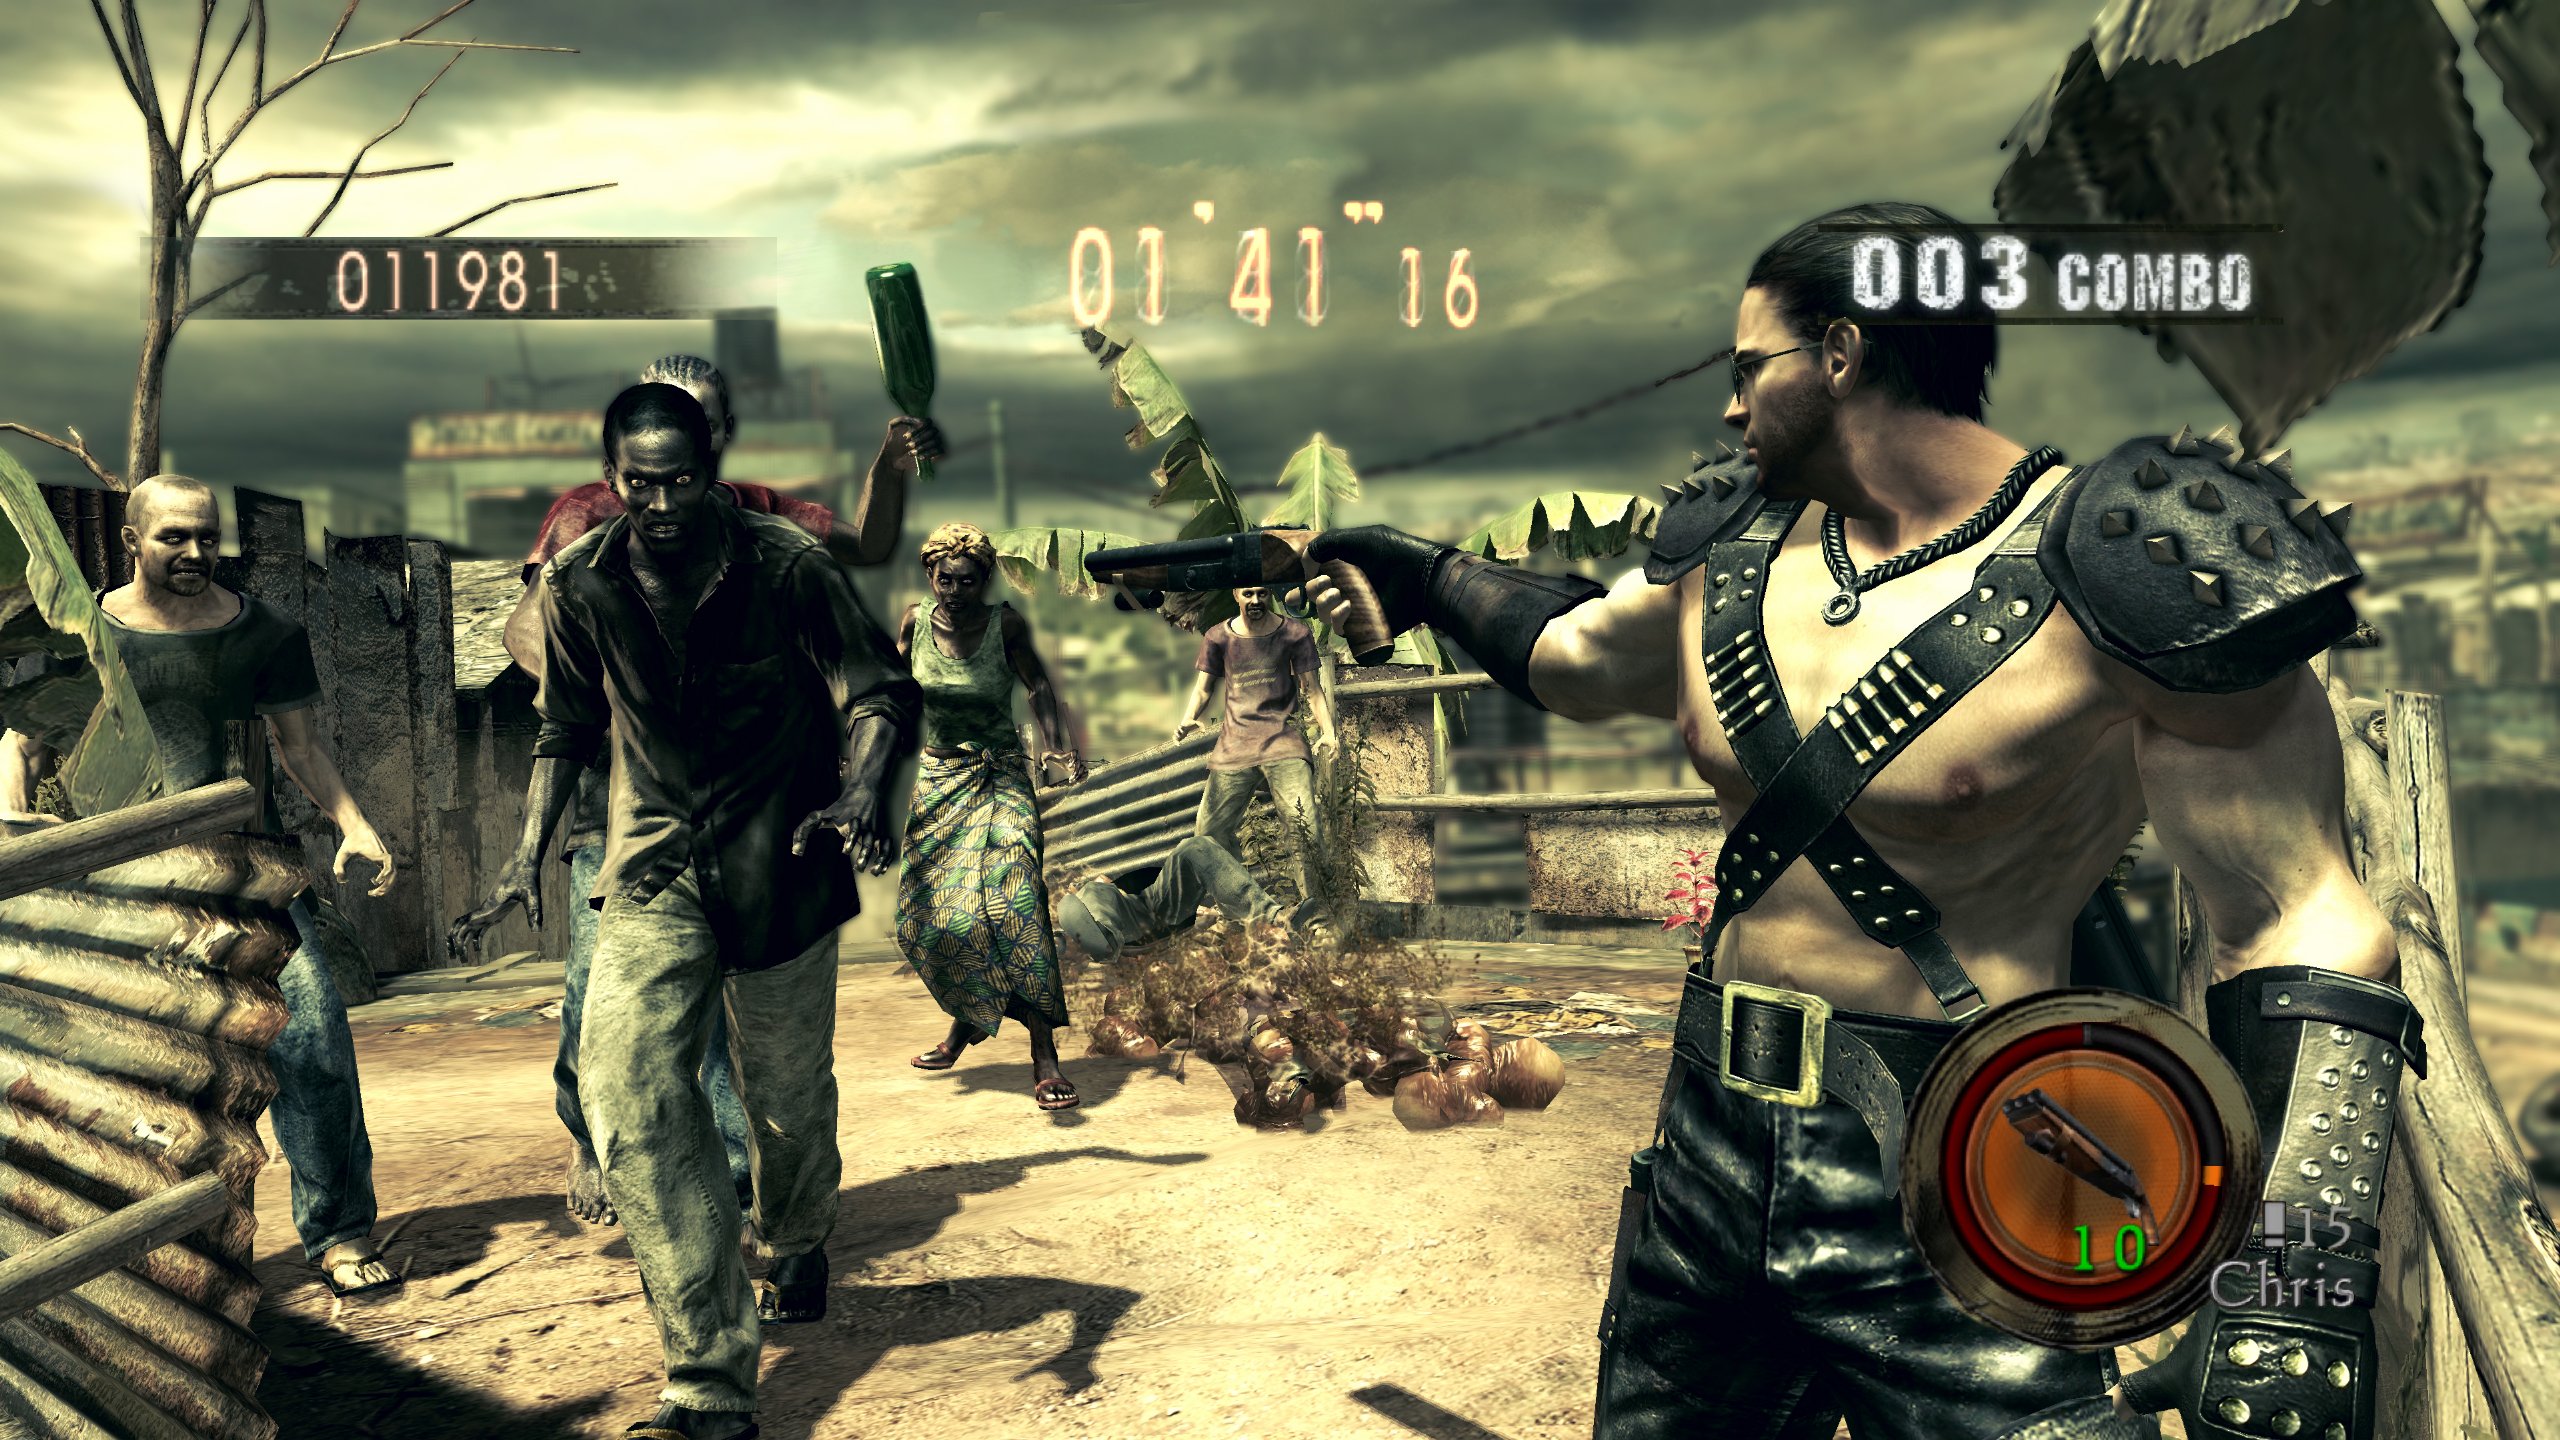 Resident Evil 5: Gold Edition - Playstation 3